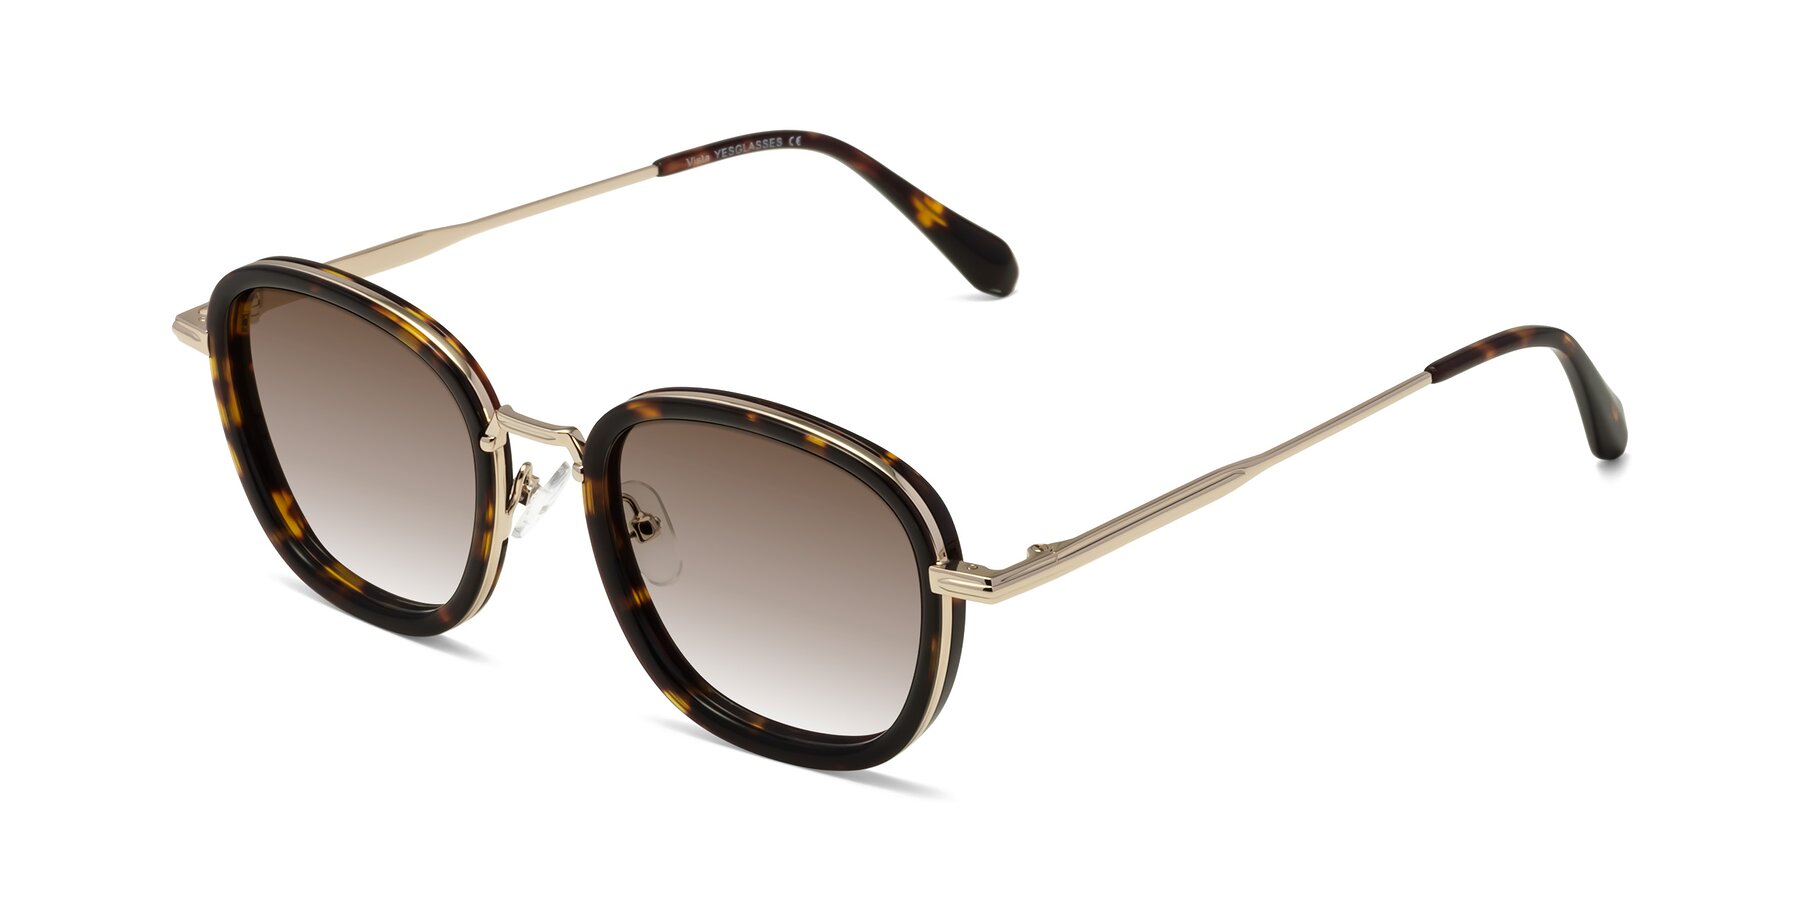 Angle of Vista in Tortoise-Light Gold with Brown Gradient Lenses